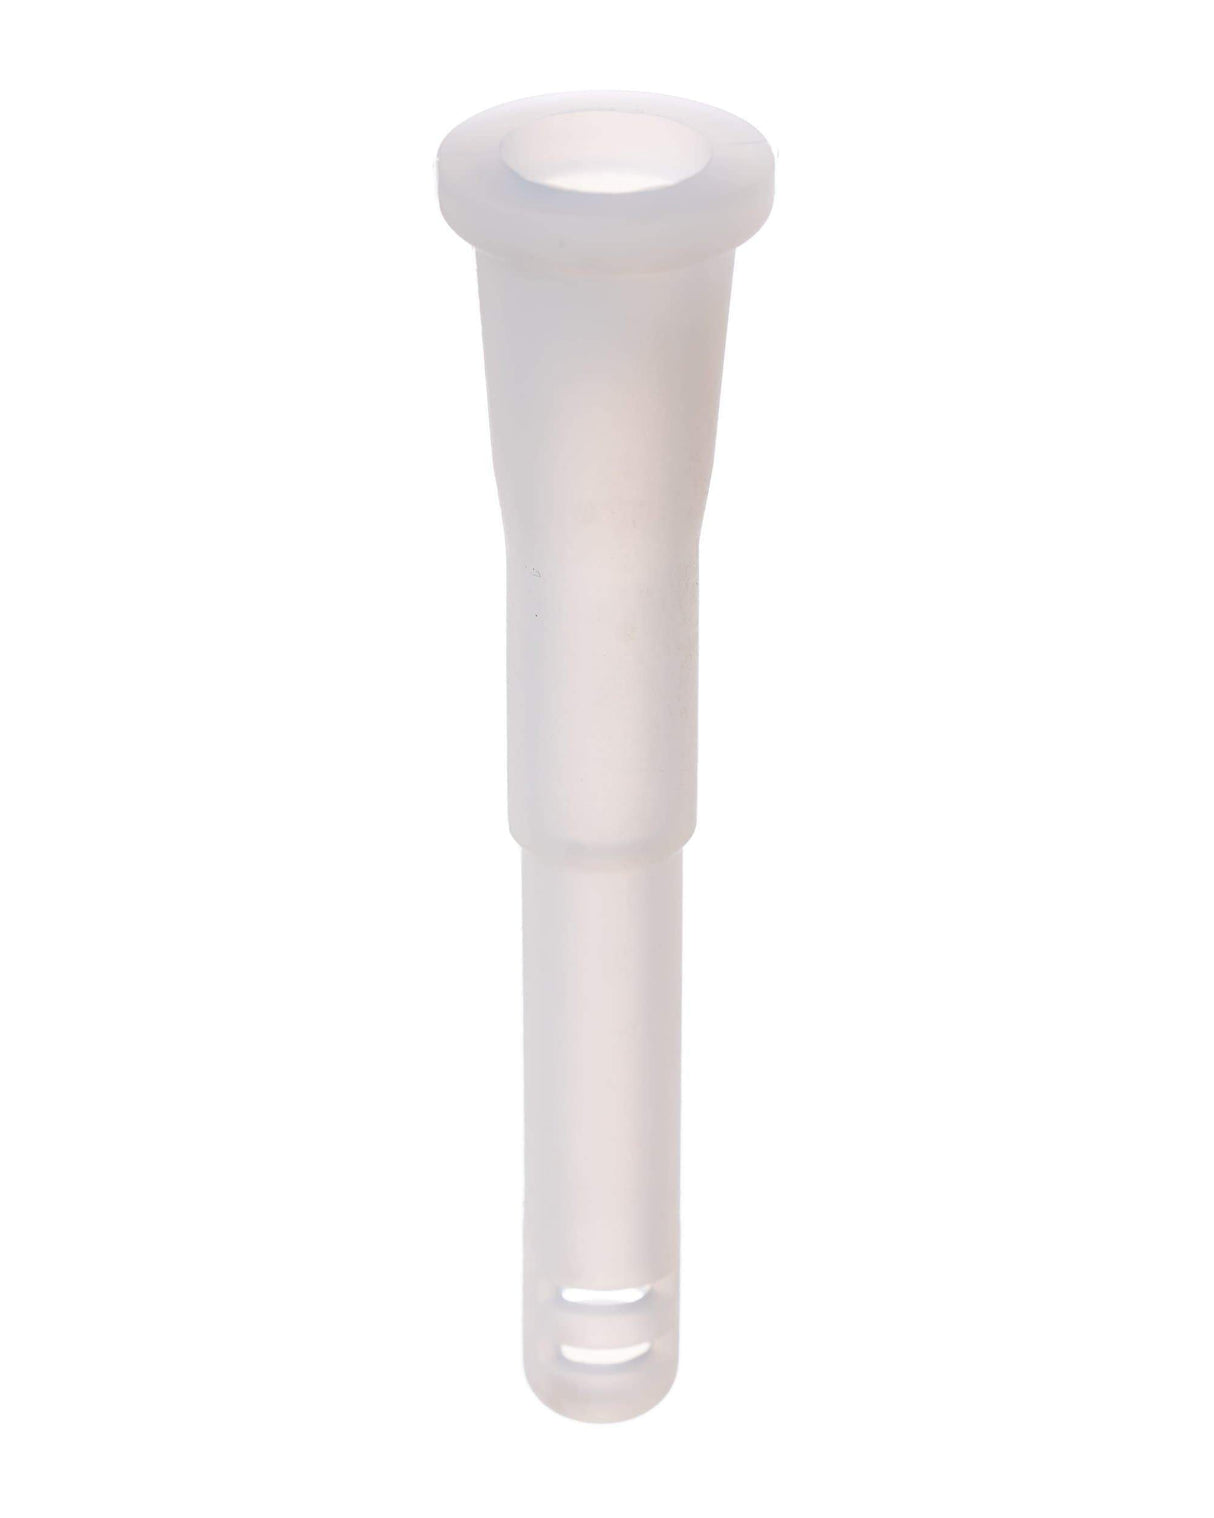 3" Clear Silicone Downstem, 18mm to 14mm Female to Male Adapter, Front View